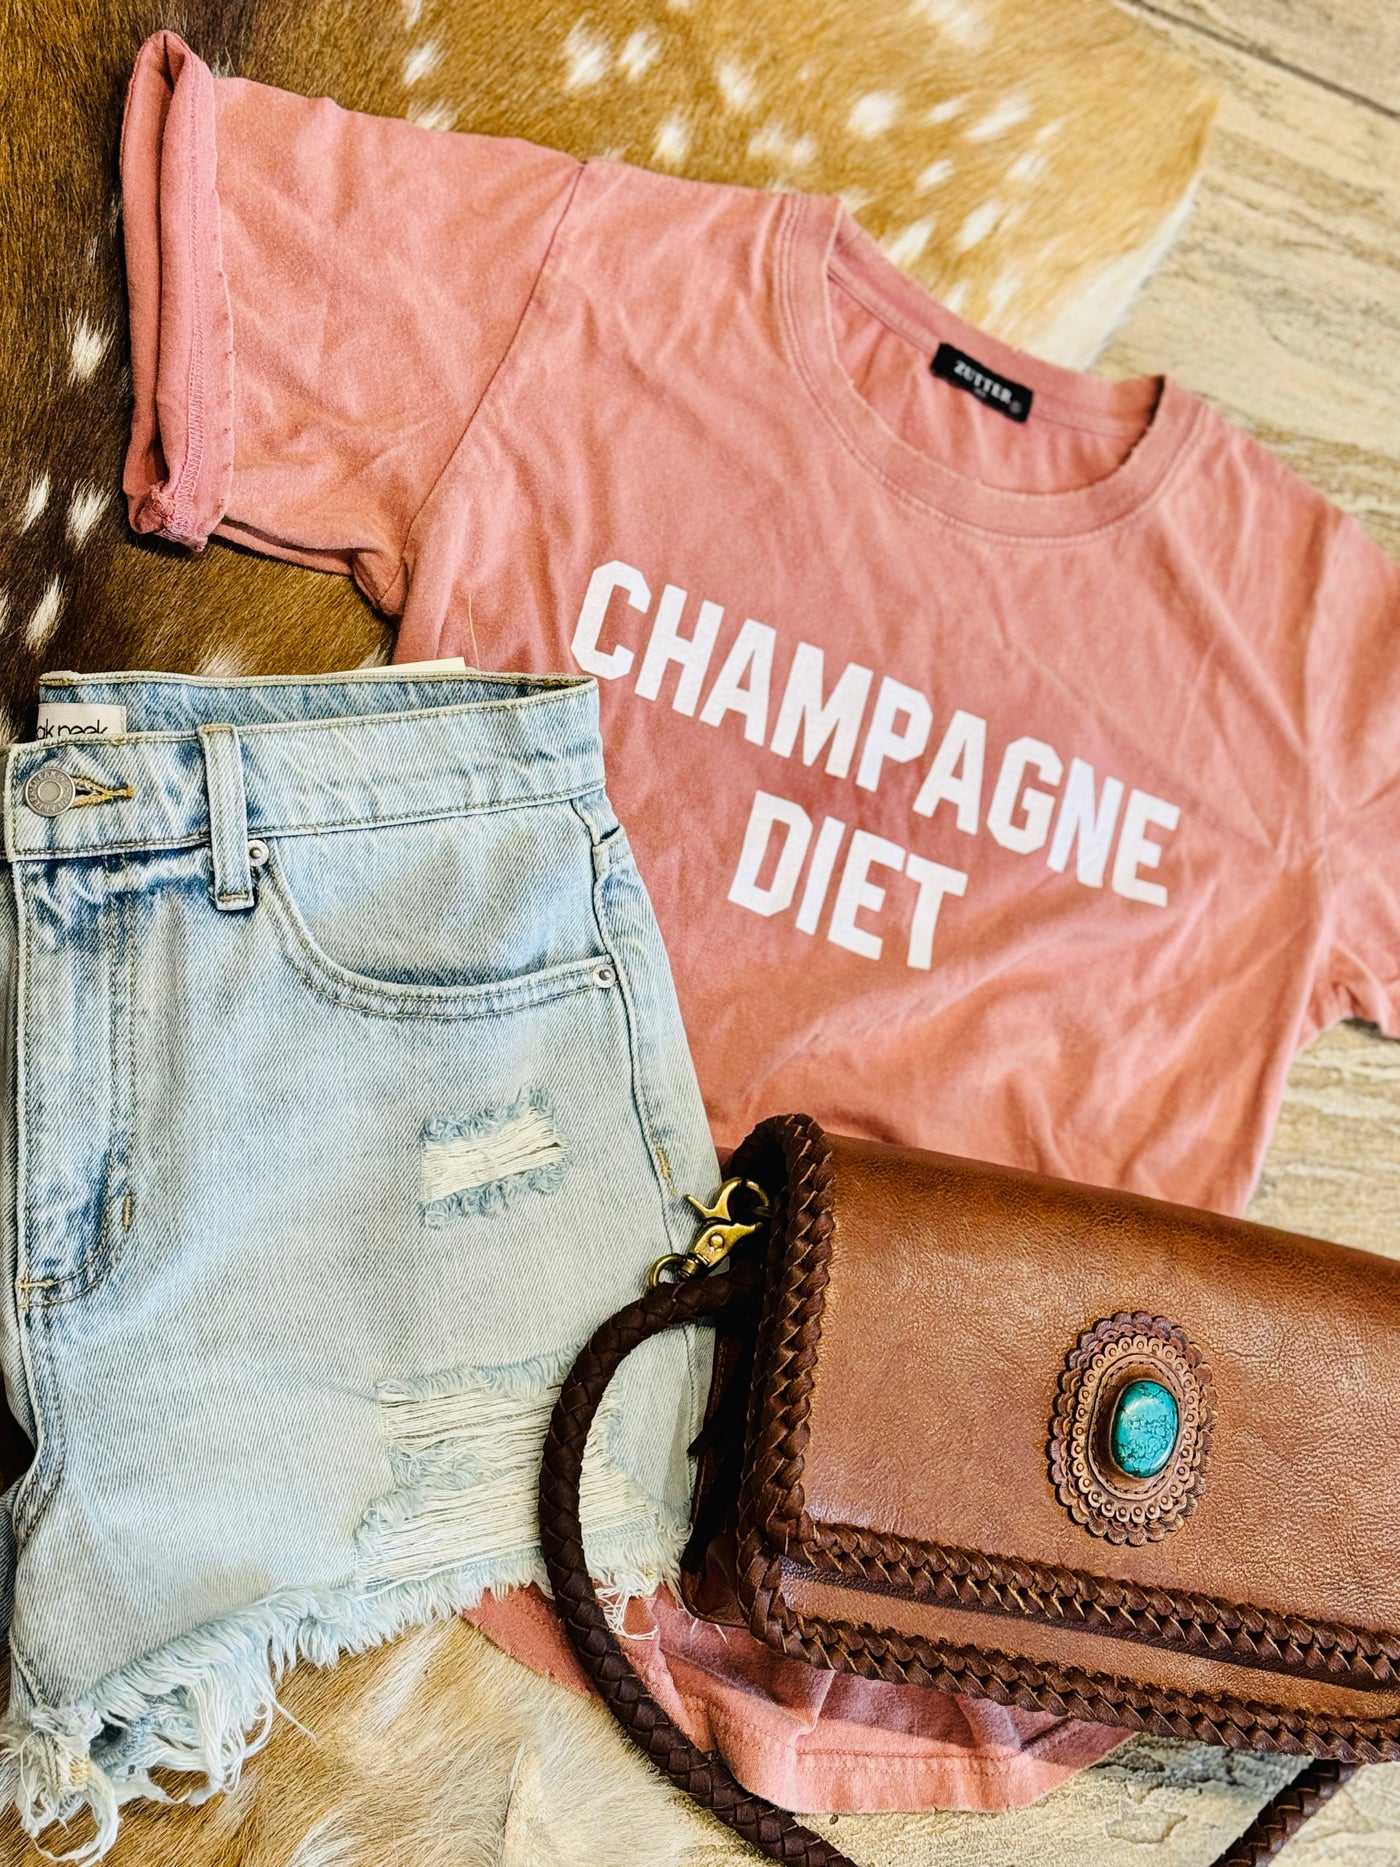 Mauve Champagne Diet Graphic Tee